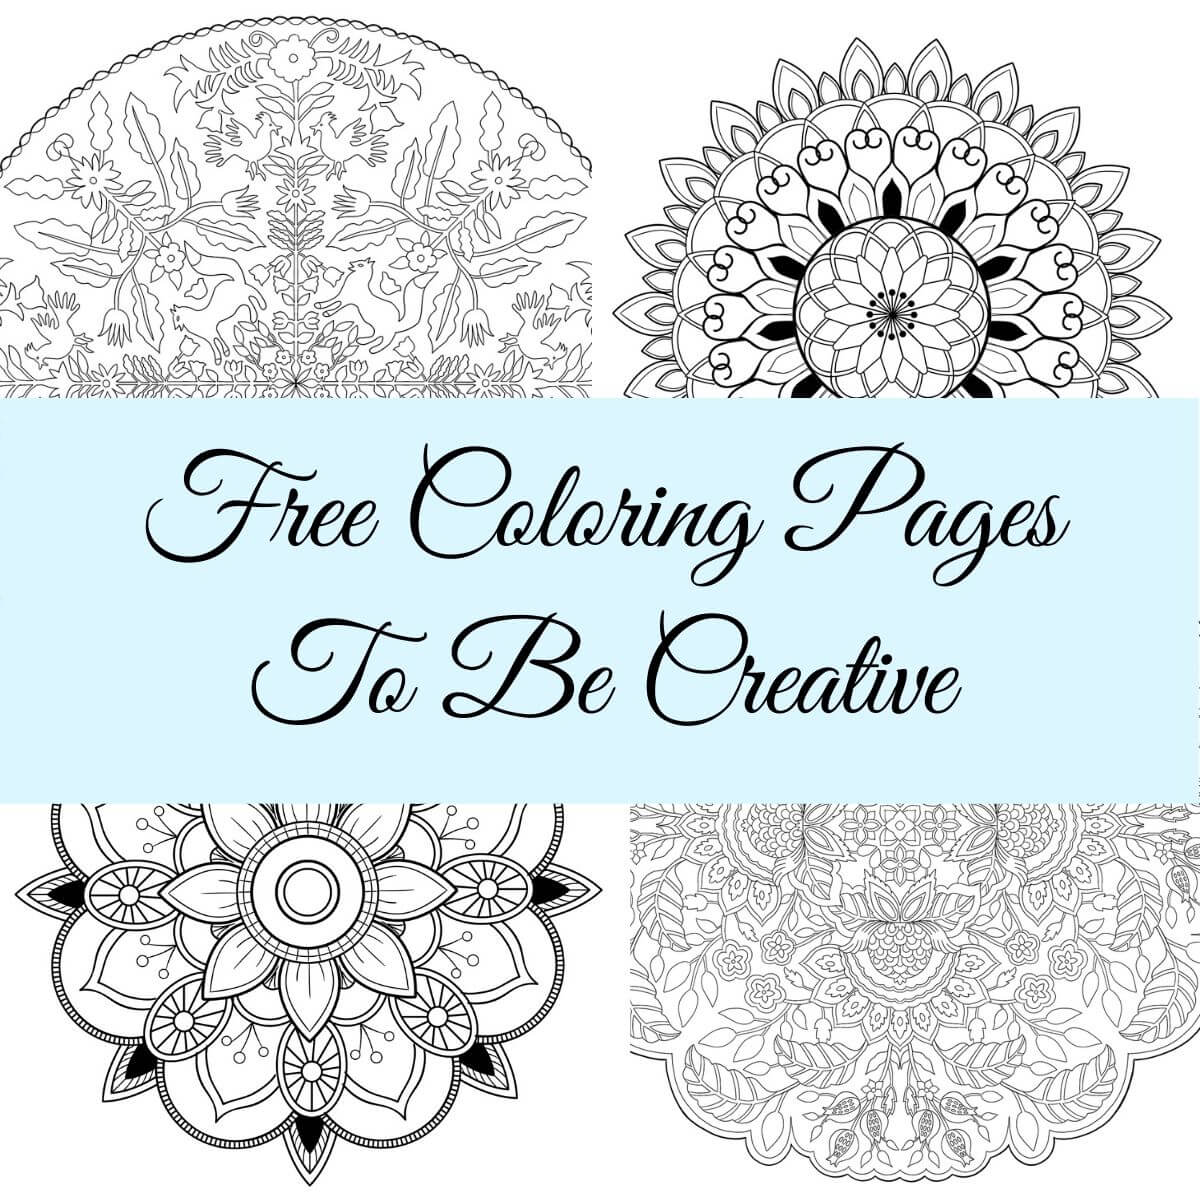 Free Coloring Pages For Be Creative - Blog